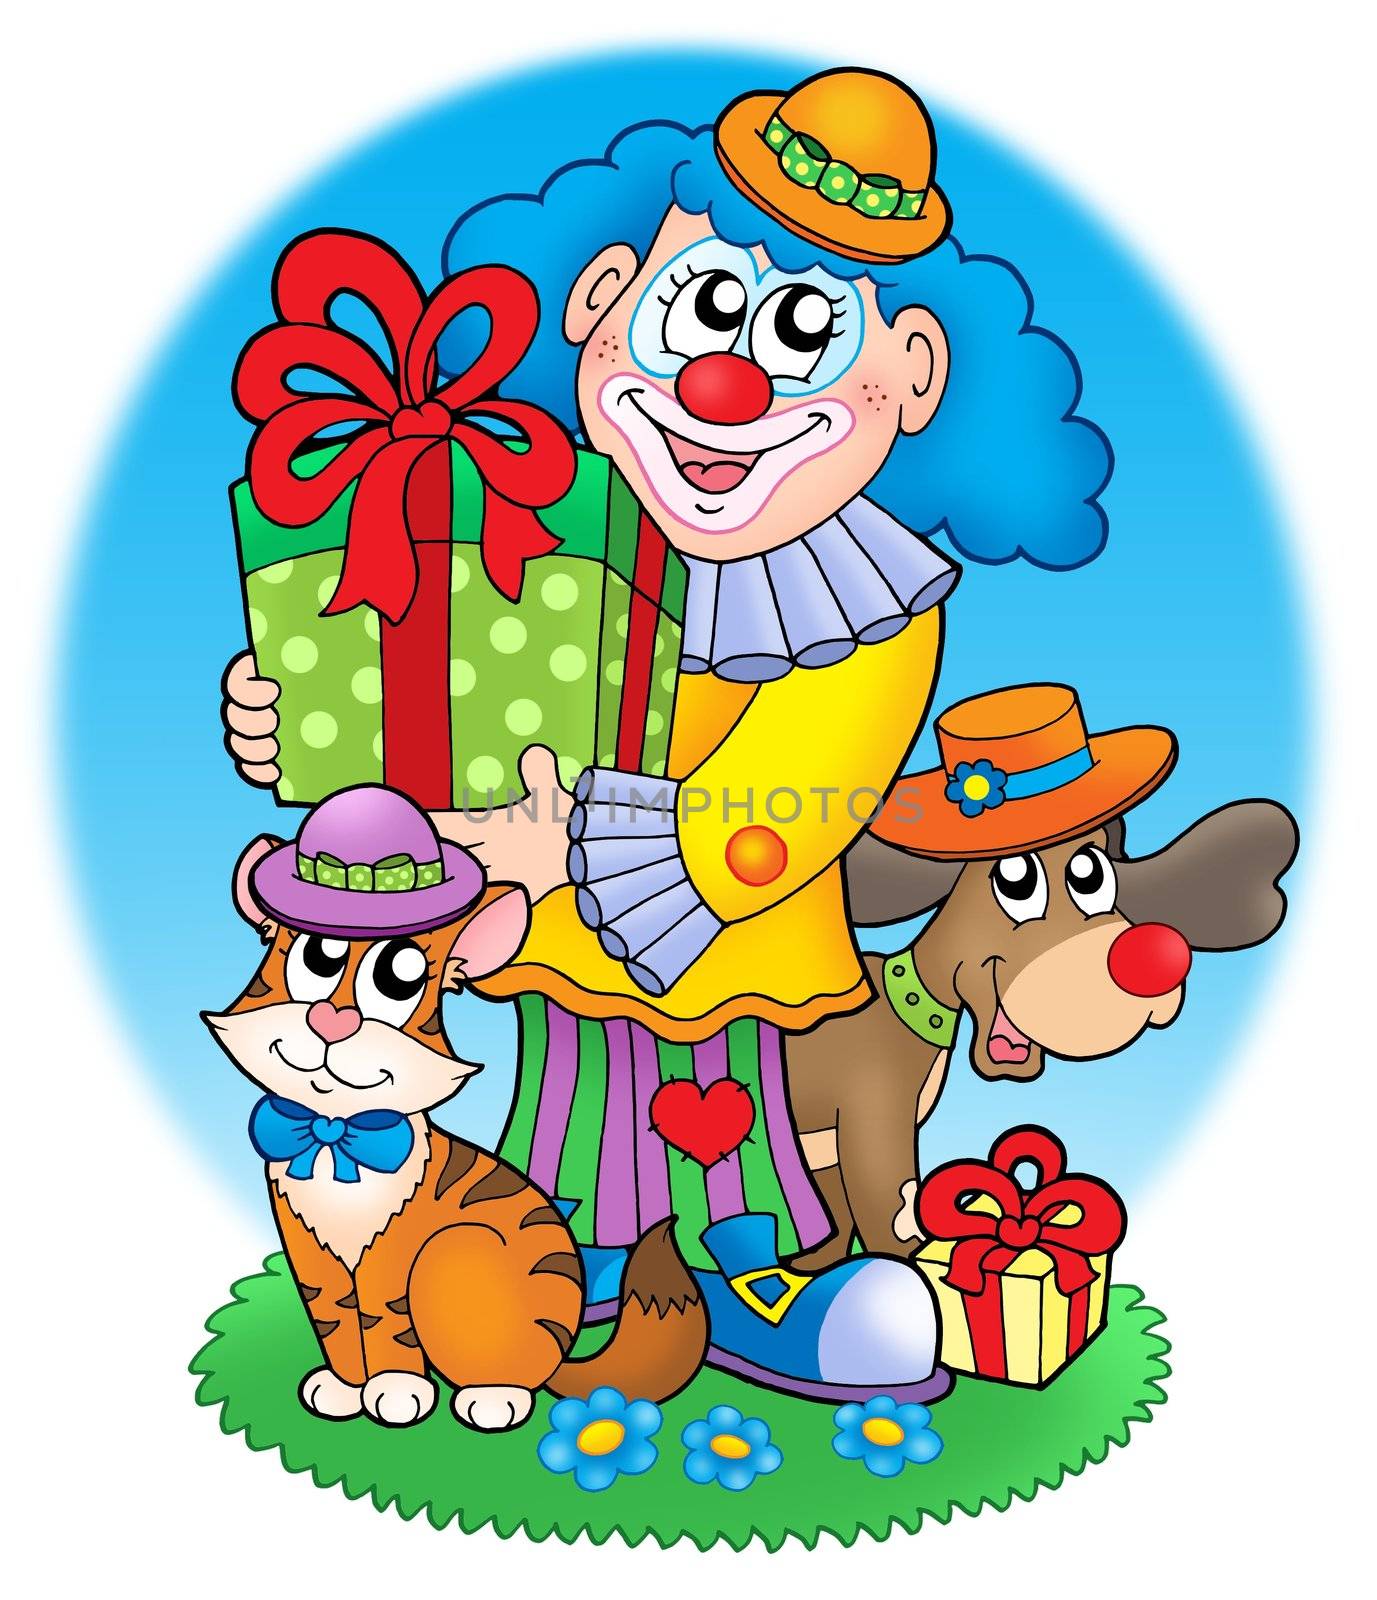 Circus clown with pets by clairev